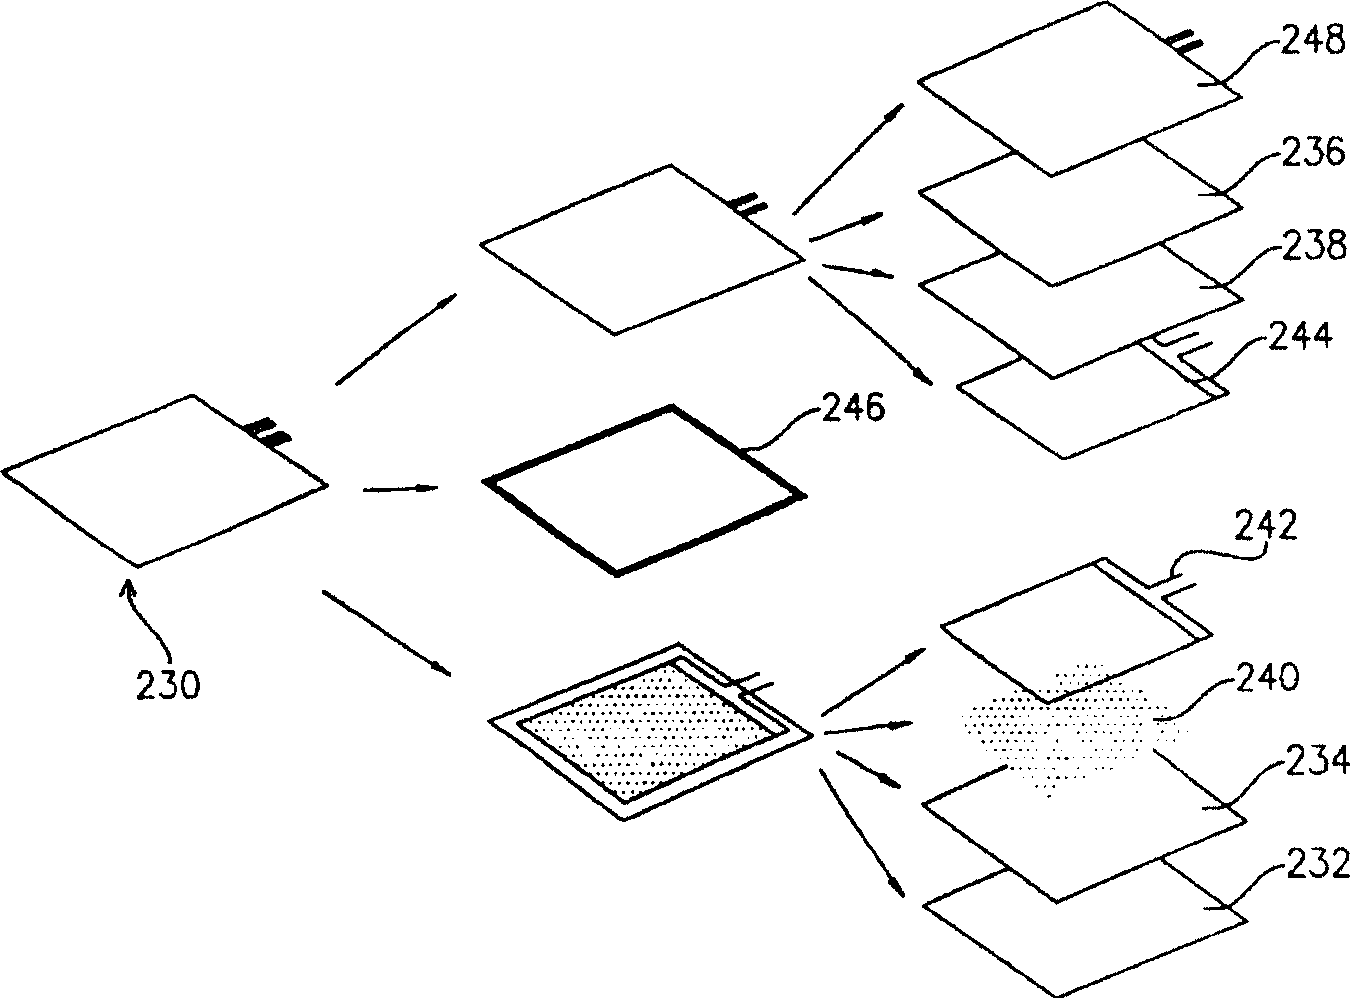 Contact-controlling LCD device